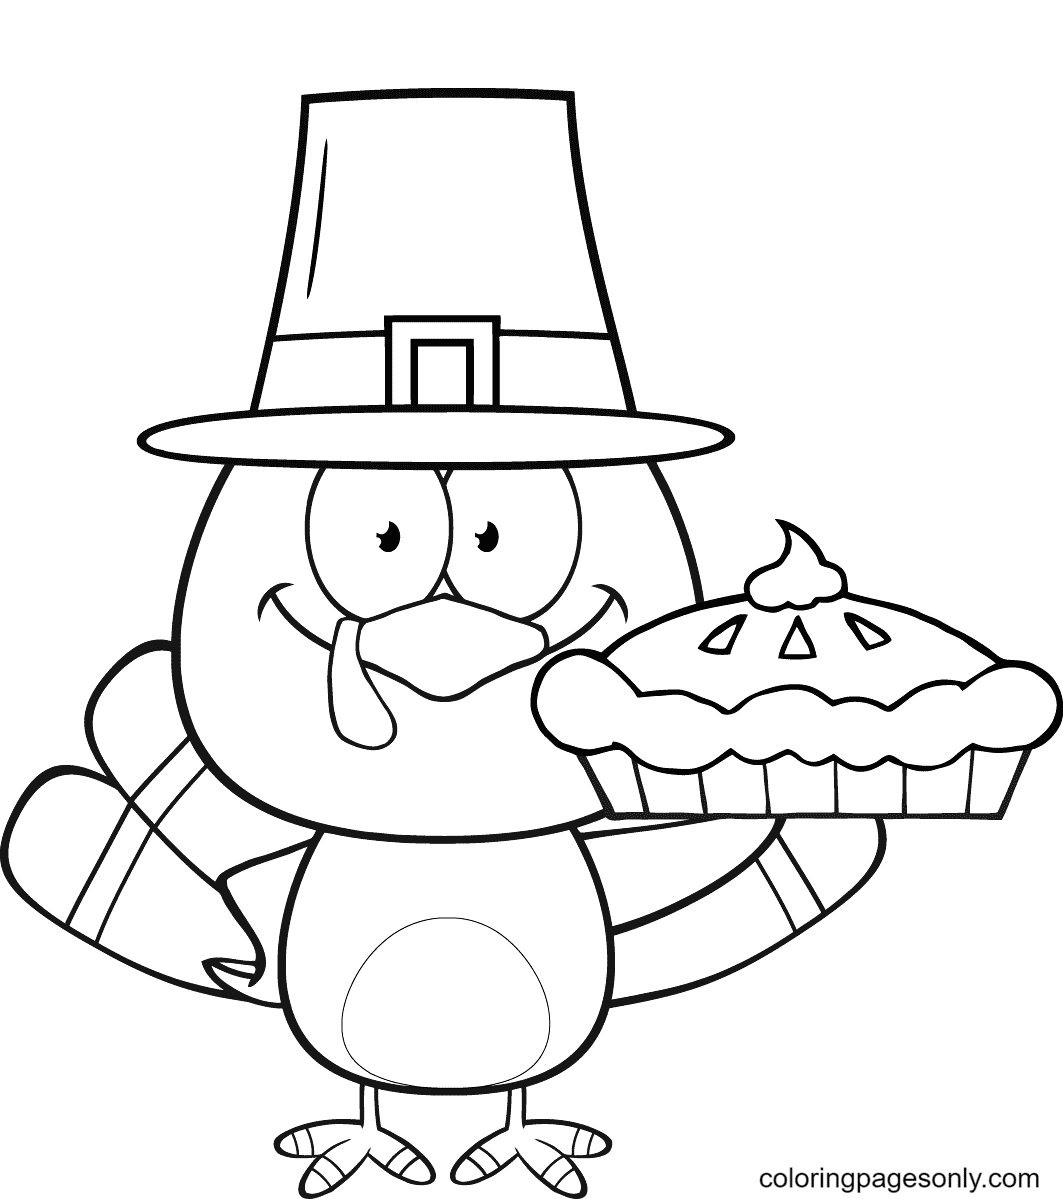 Cute Pilgrim Turkey Holding a Pie Coloring Page